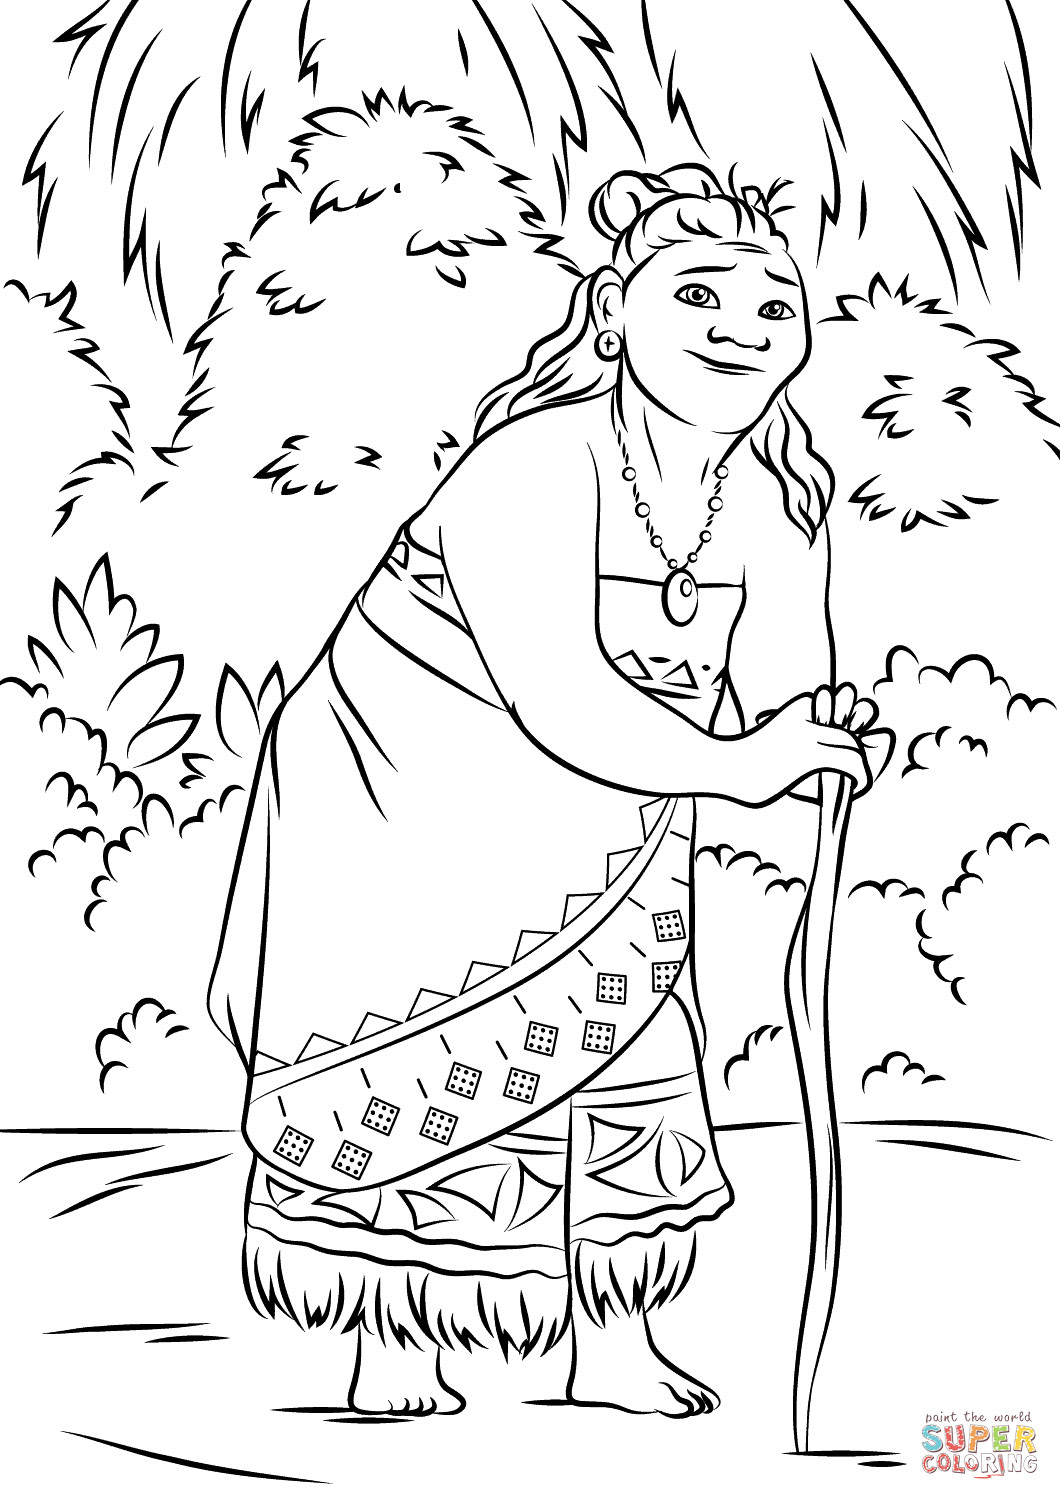 Printable Moana Coloring Pages
 Gramma Tala from Moana coloring page